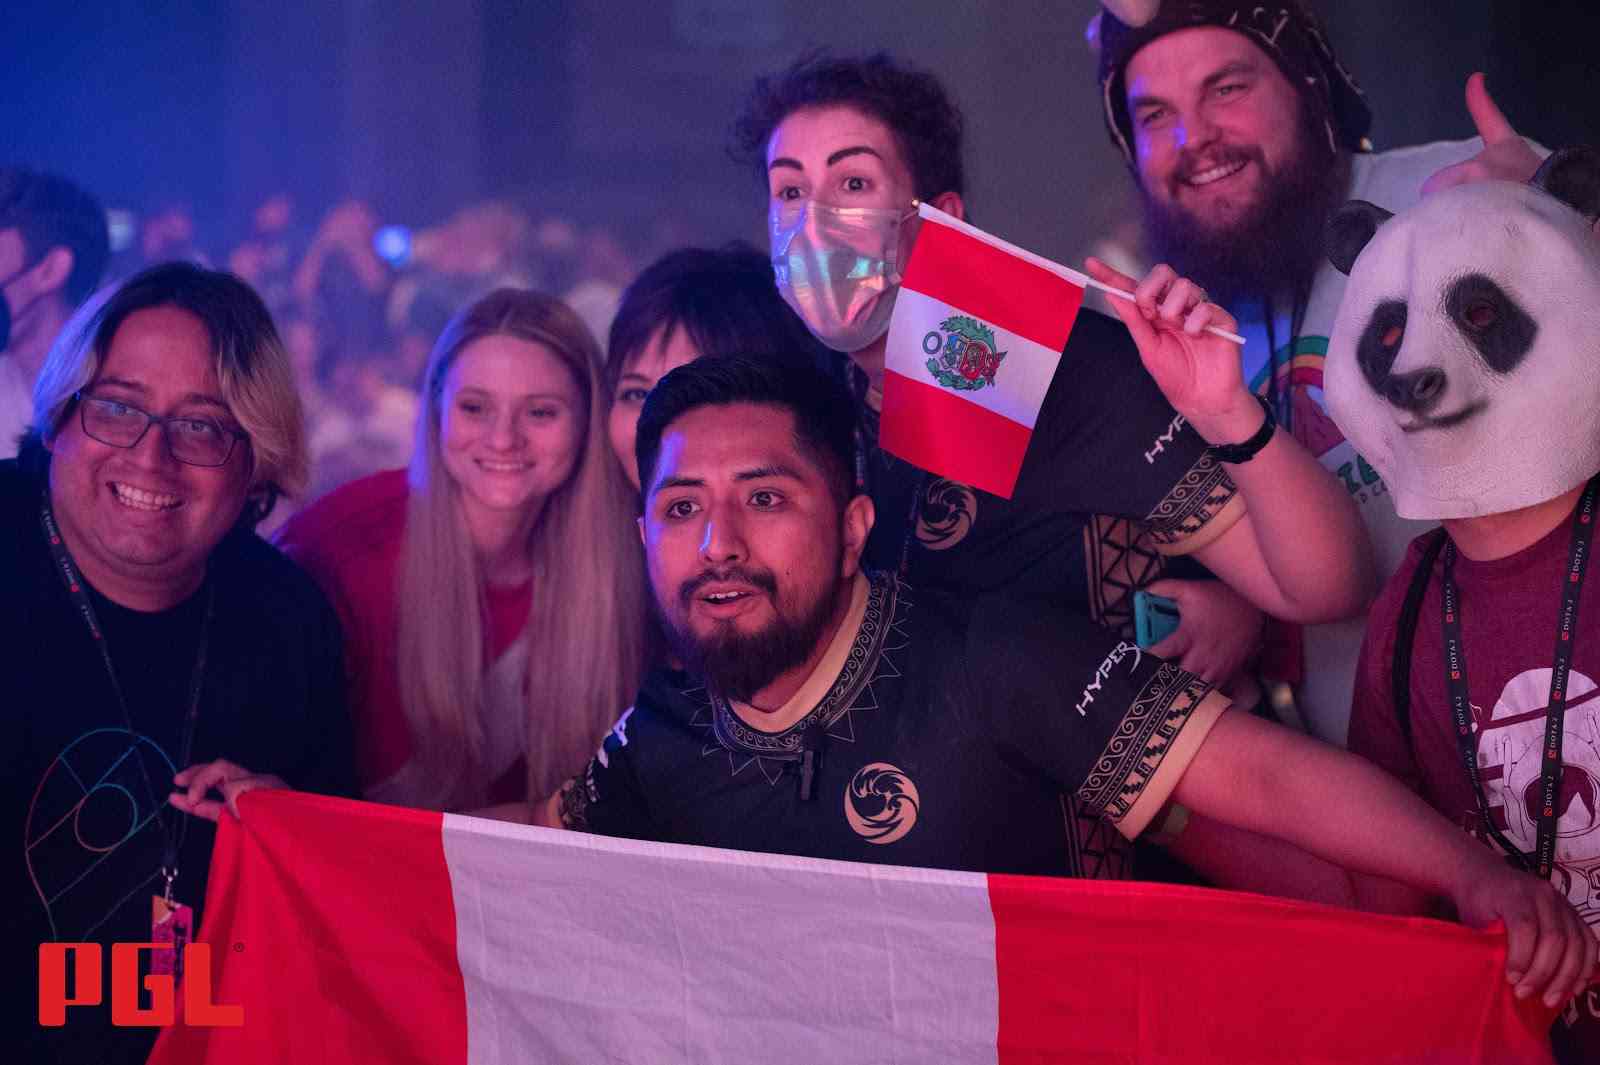 Beastcoast fans hold up flags to cheer on the team in the audience at the PGL Arlington Major 2022